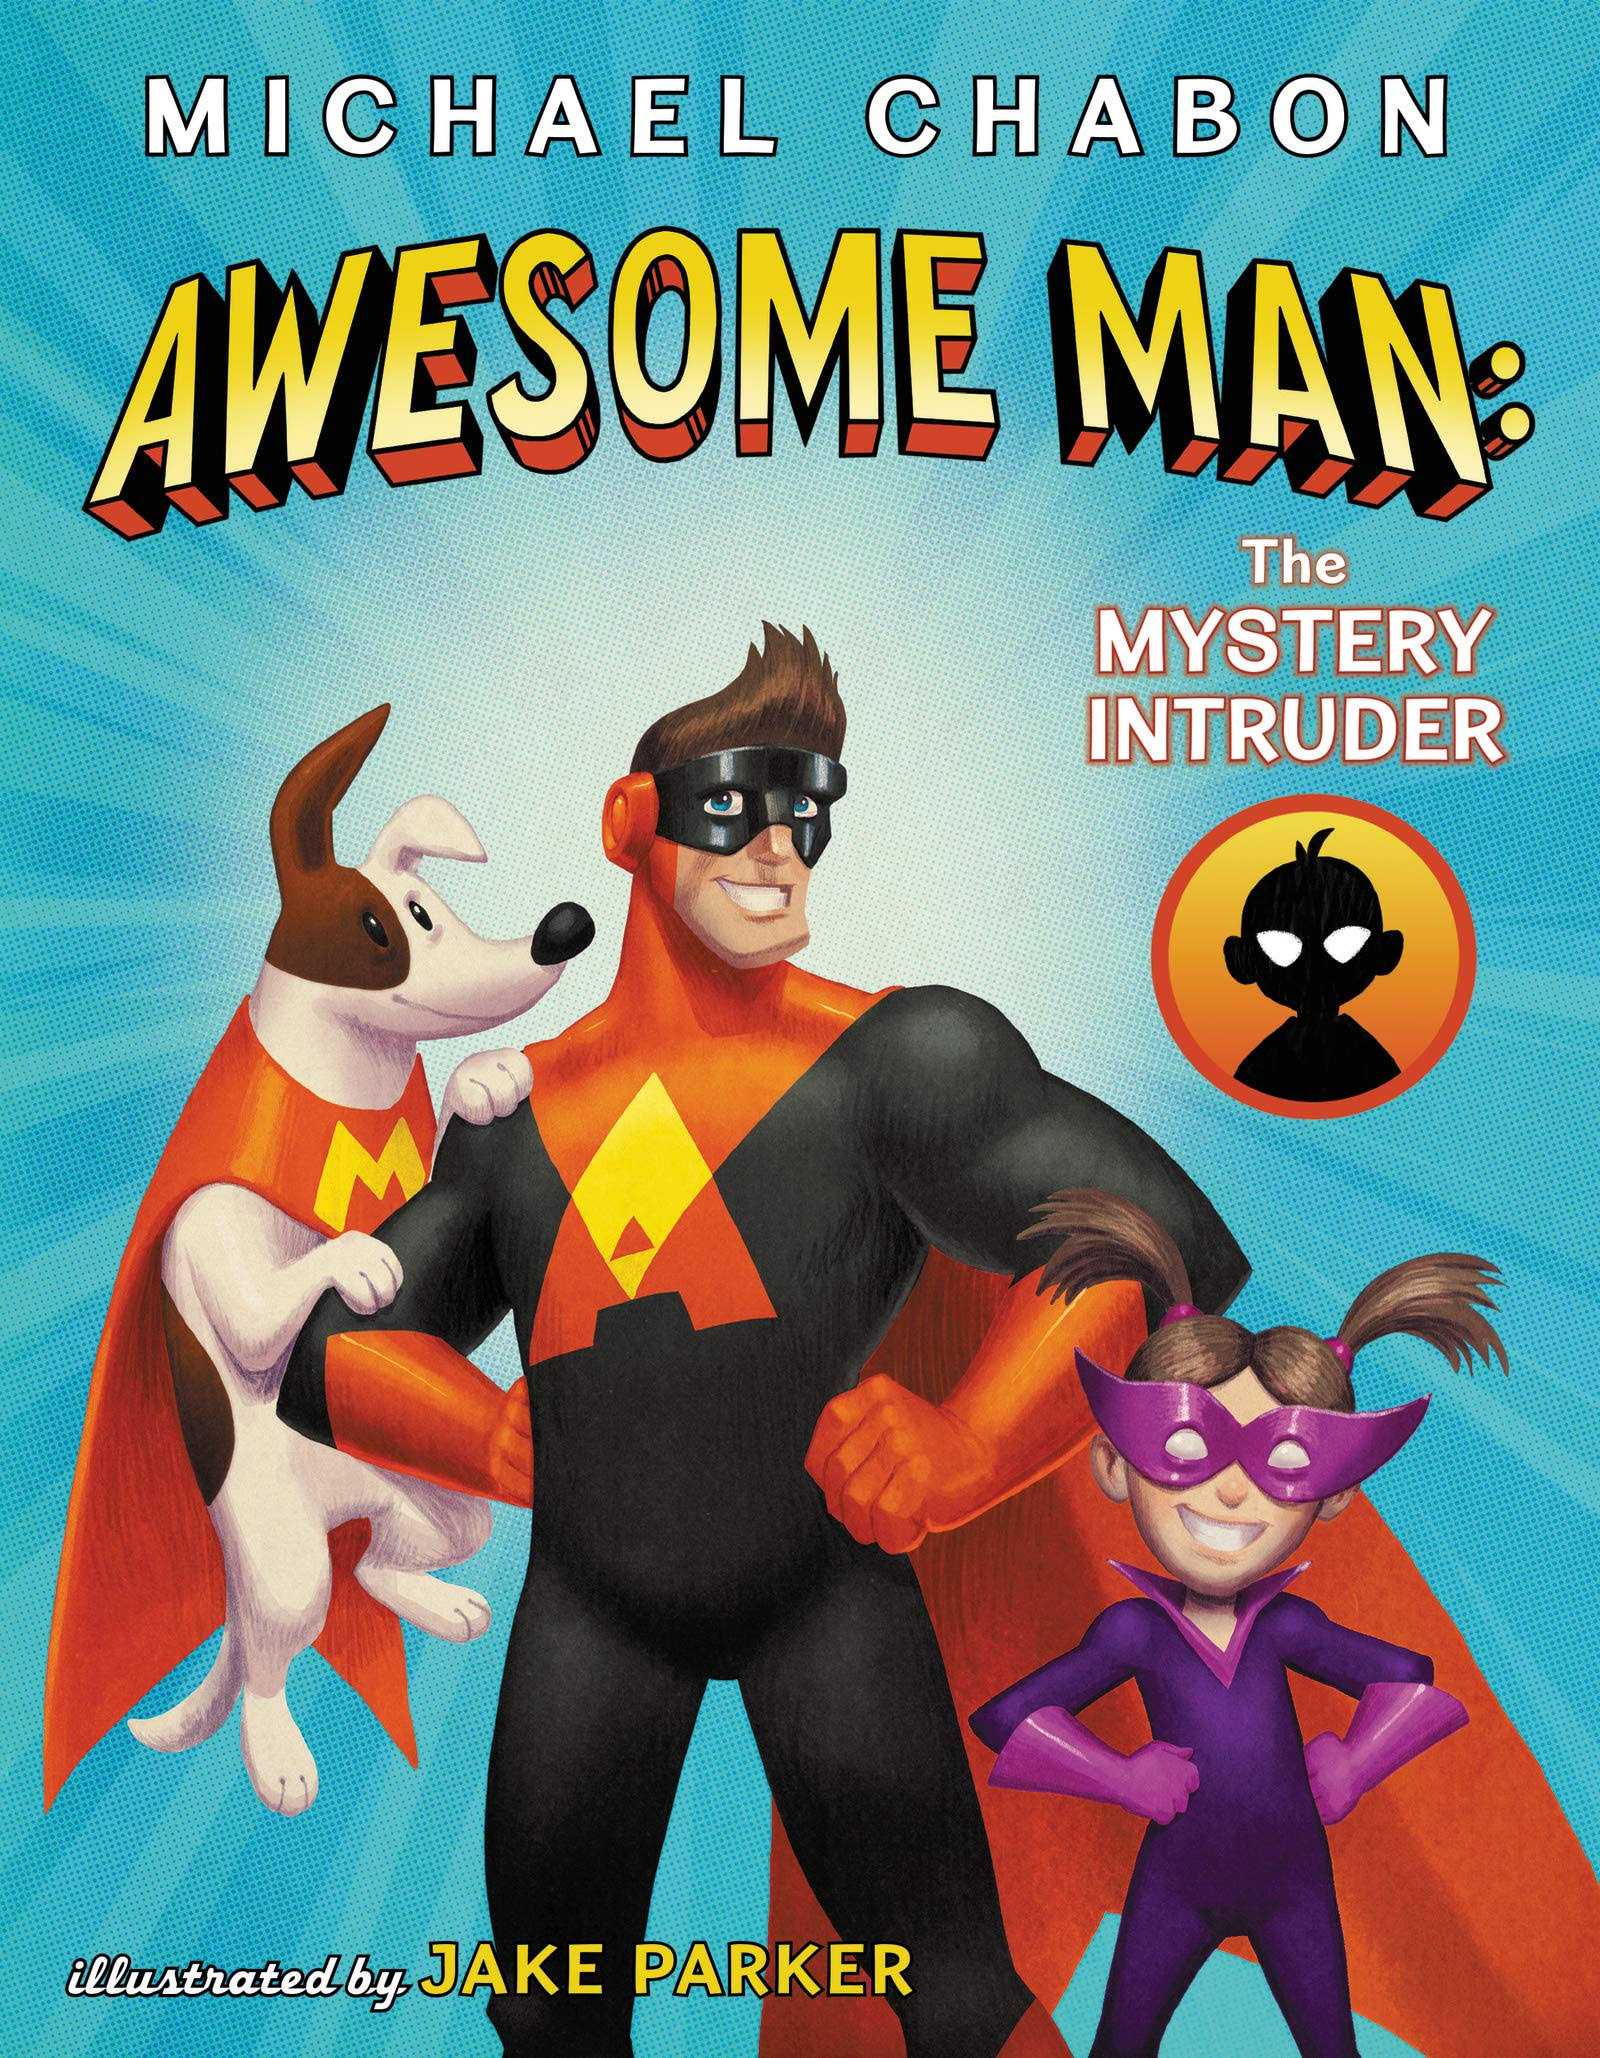 Awesome Man The Mystery Intruder by Michael Chabon